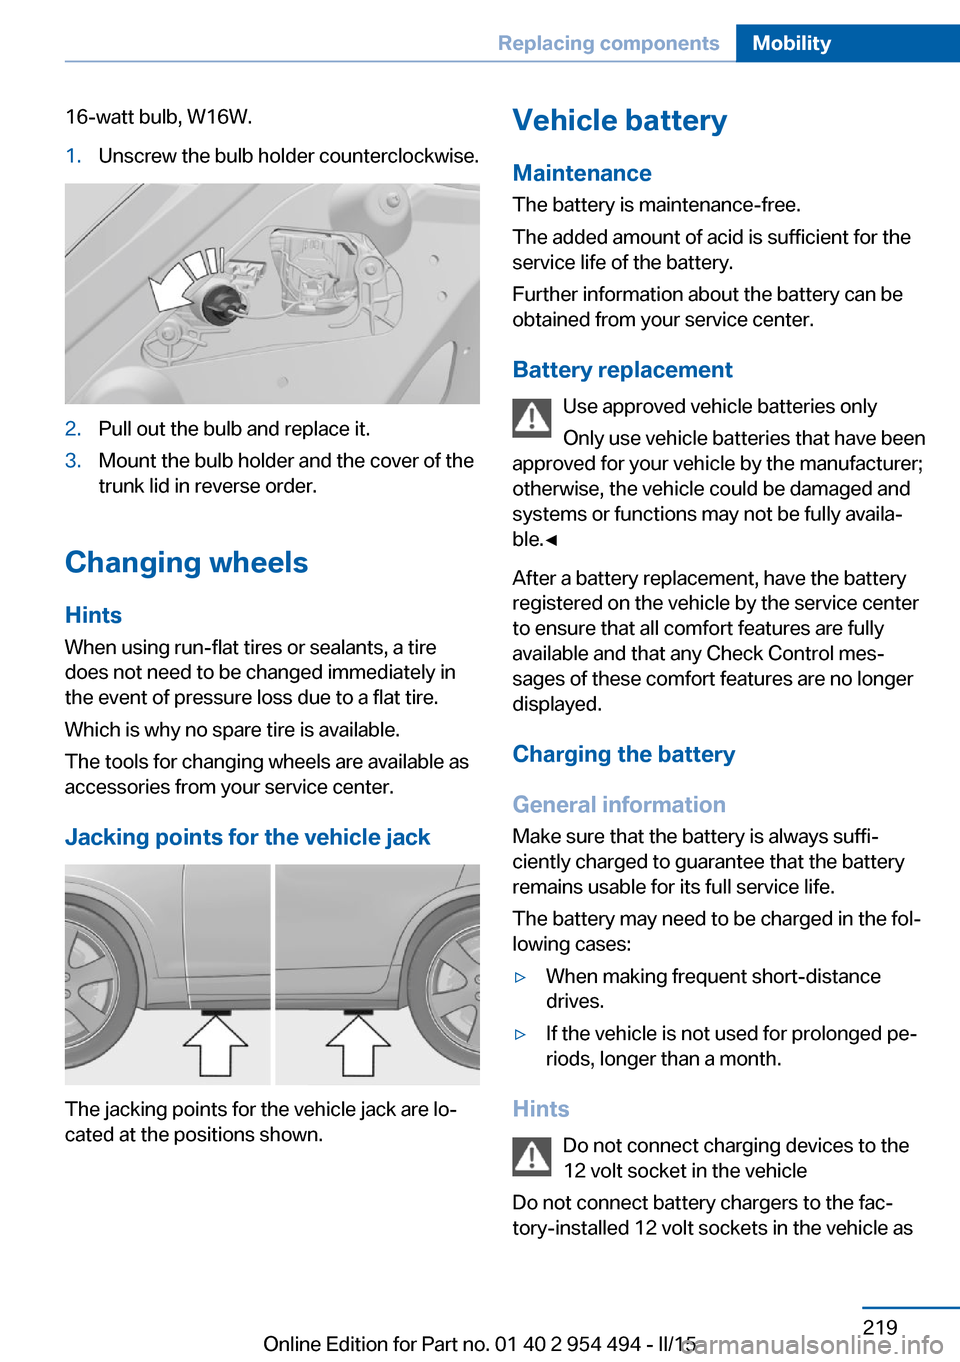 BMW 6 SERIES COUPE 2016 F13 Owners Manual 16-watt bulb, W16W.1.Unscrew the bulb holder counterclockwise.2.Pull out the bulb and replace it.3.Mount the bulb holder and the cover of the
trunk lid in reverse order.
Changing wheels
Hints
When usi